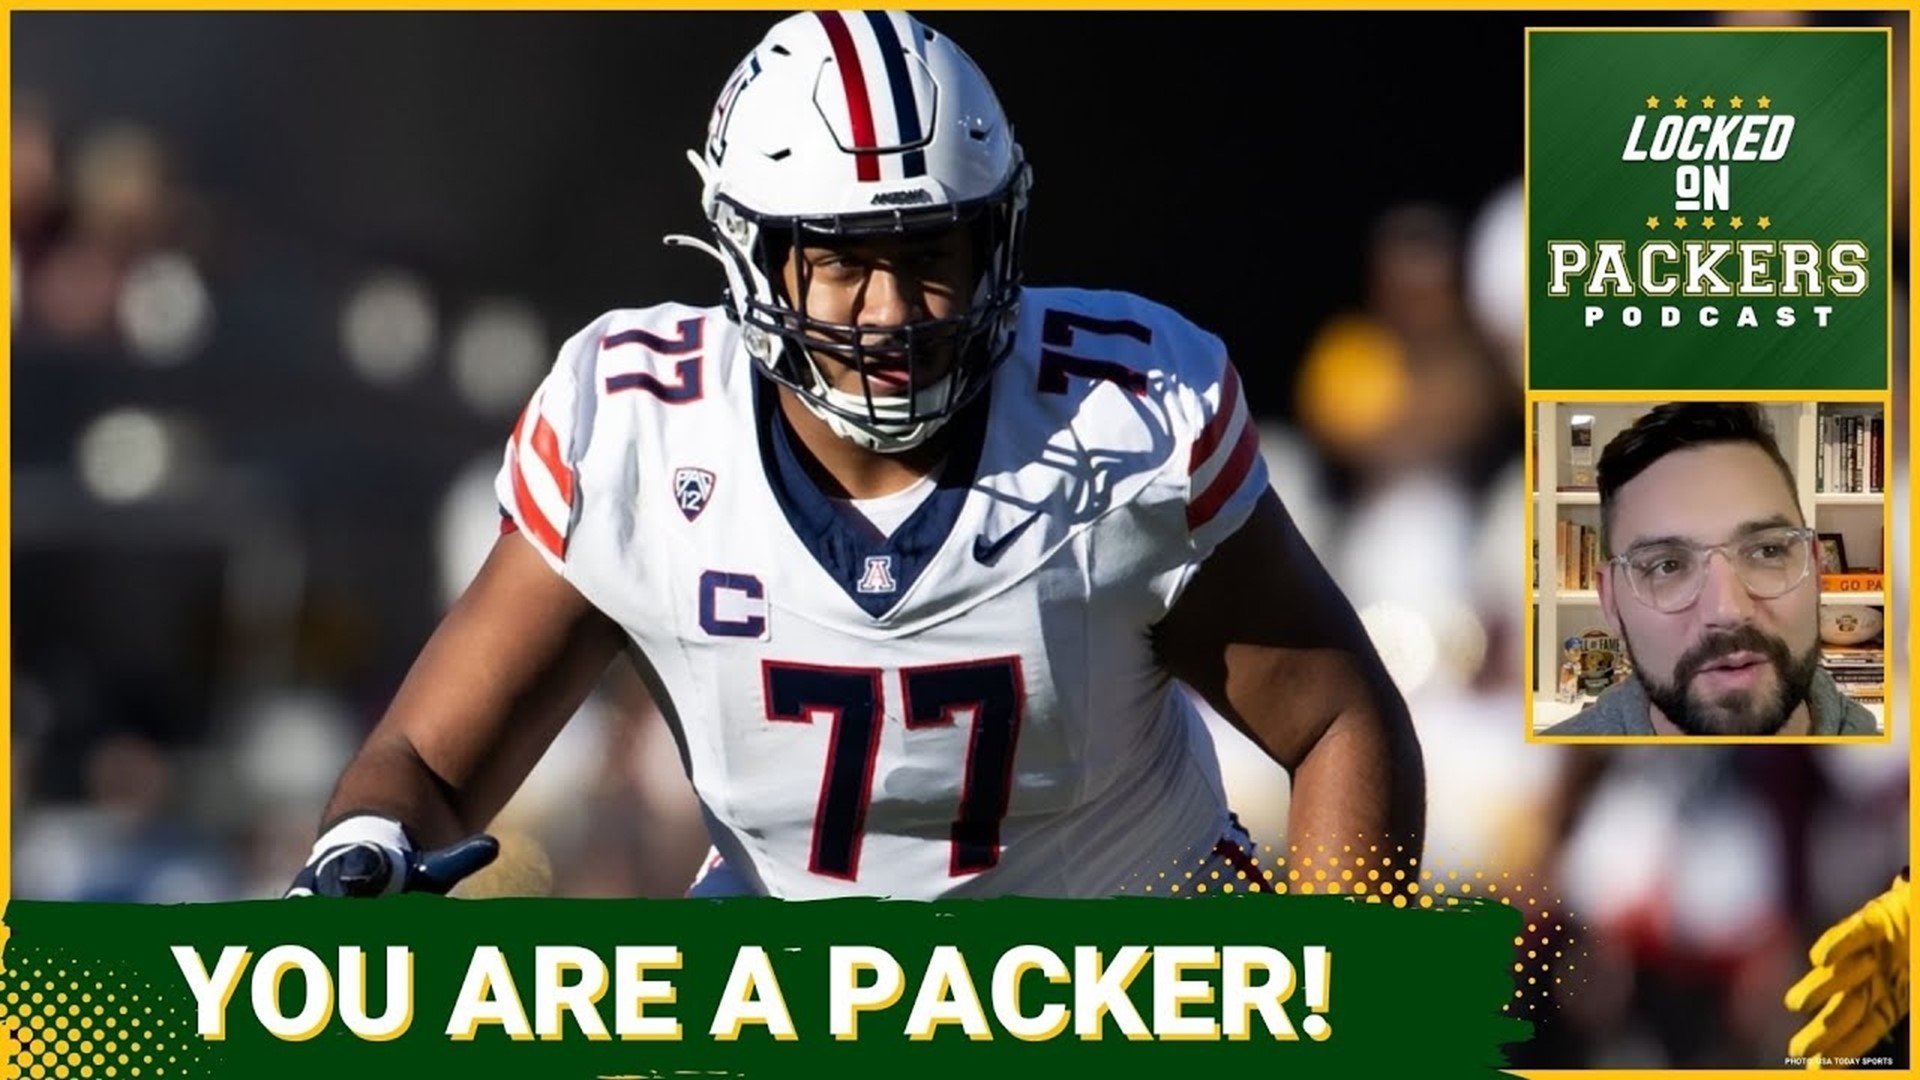 We hear a lot about Packers "types," in the NFL draft. What does it even mean? How did we figure this out from the outside?